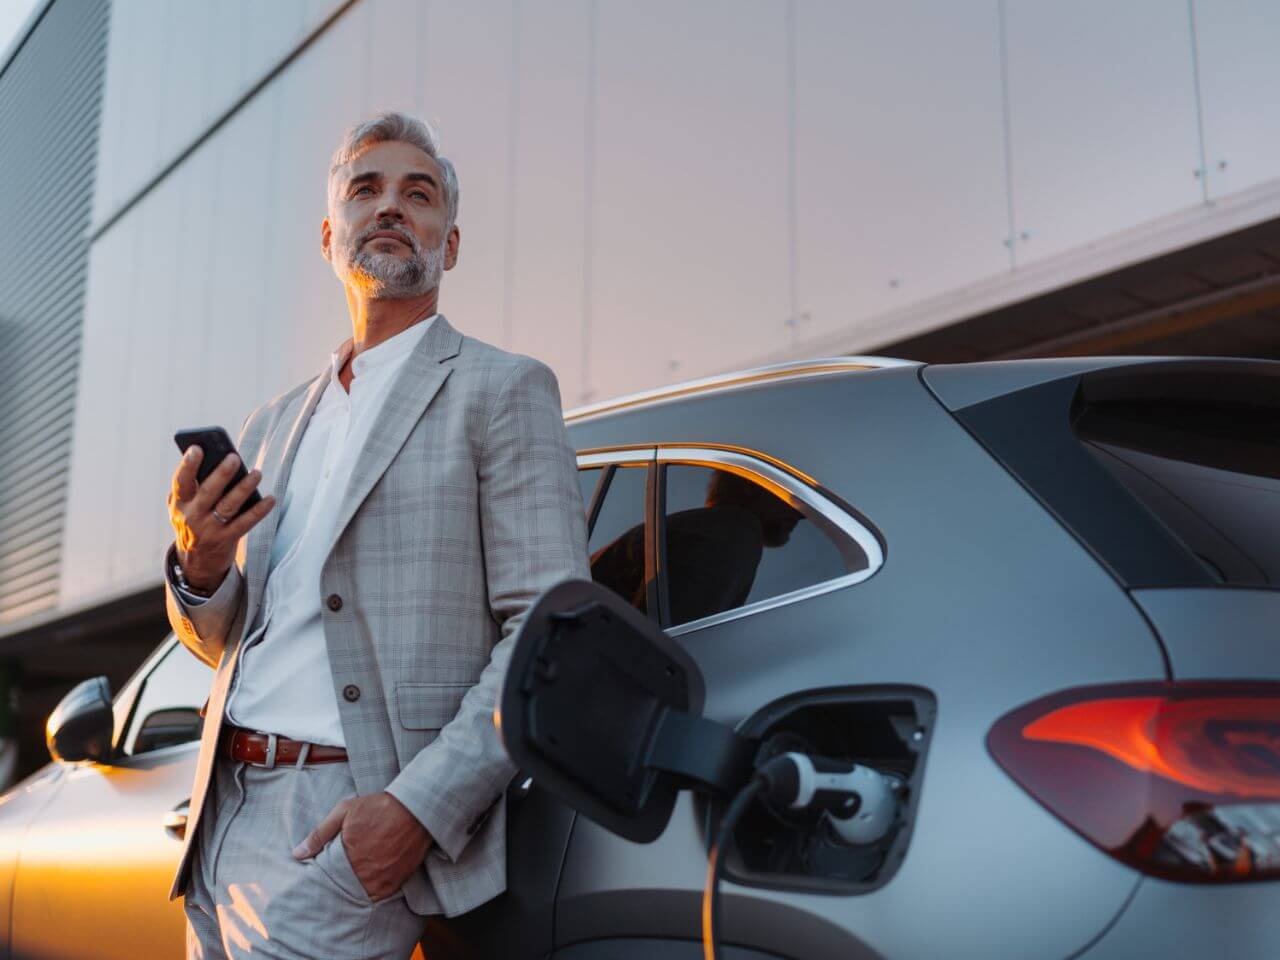 Middle-aged businessman leaning on his charging electric vehicle, representing EV charging for businesses.